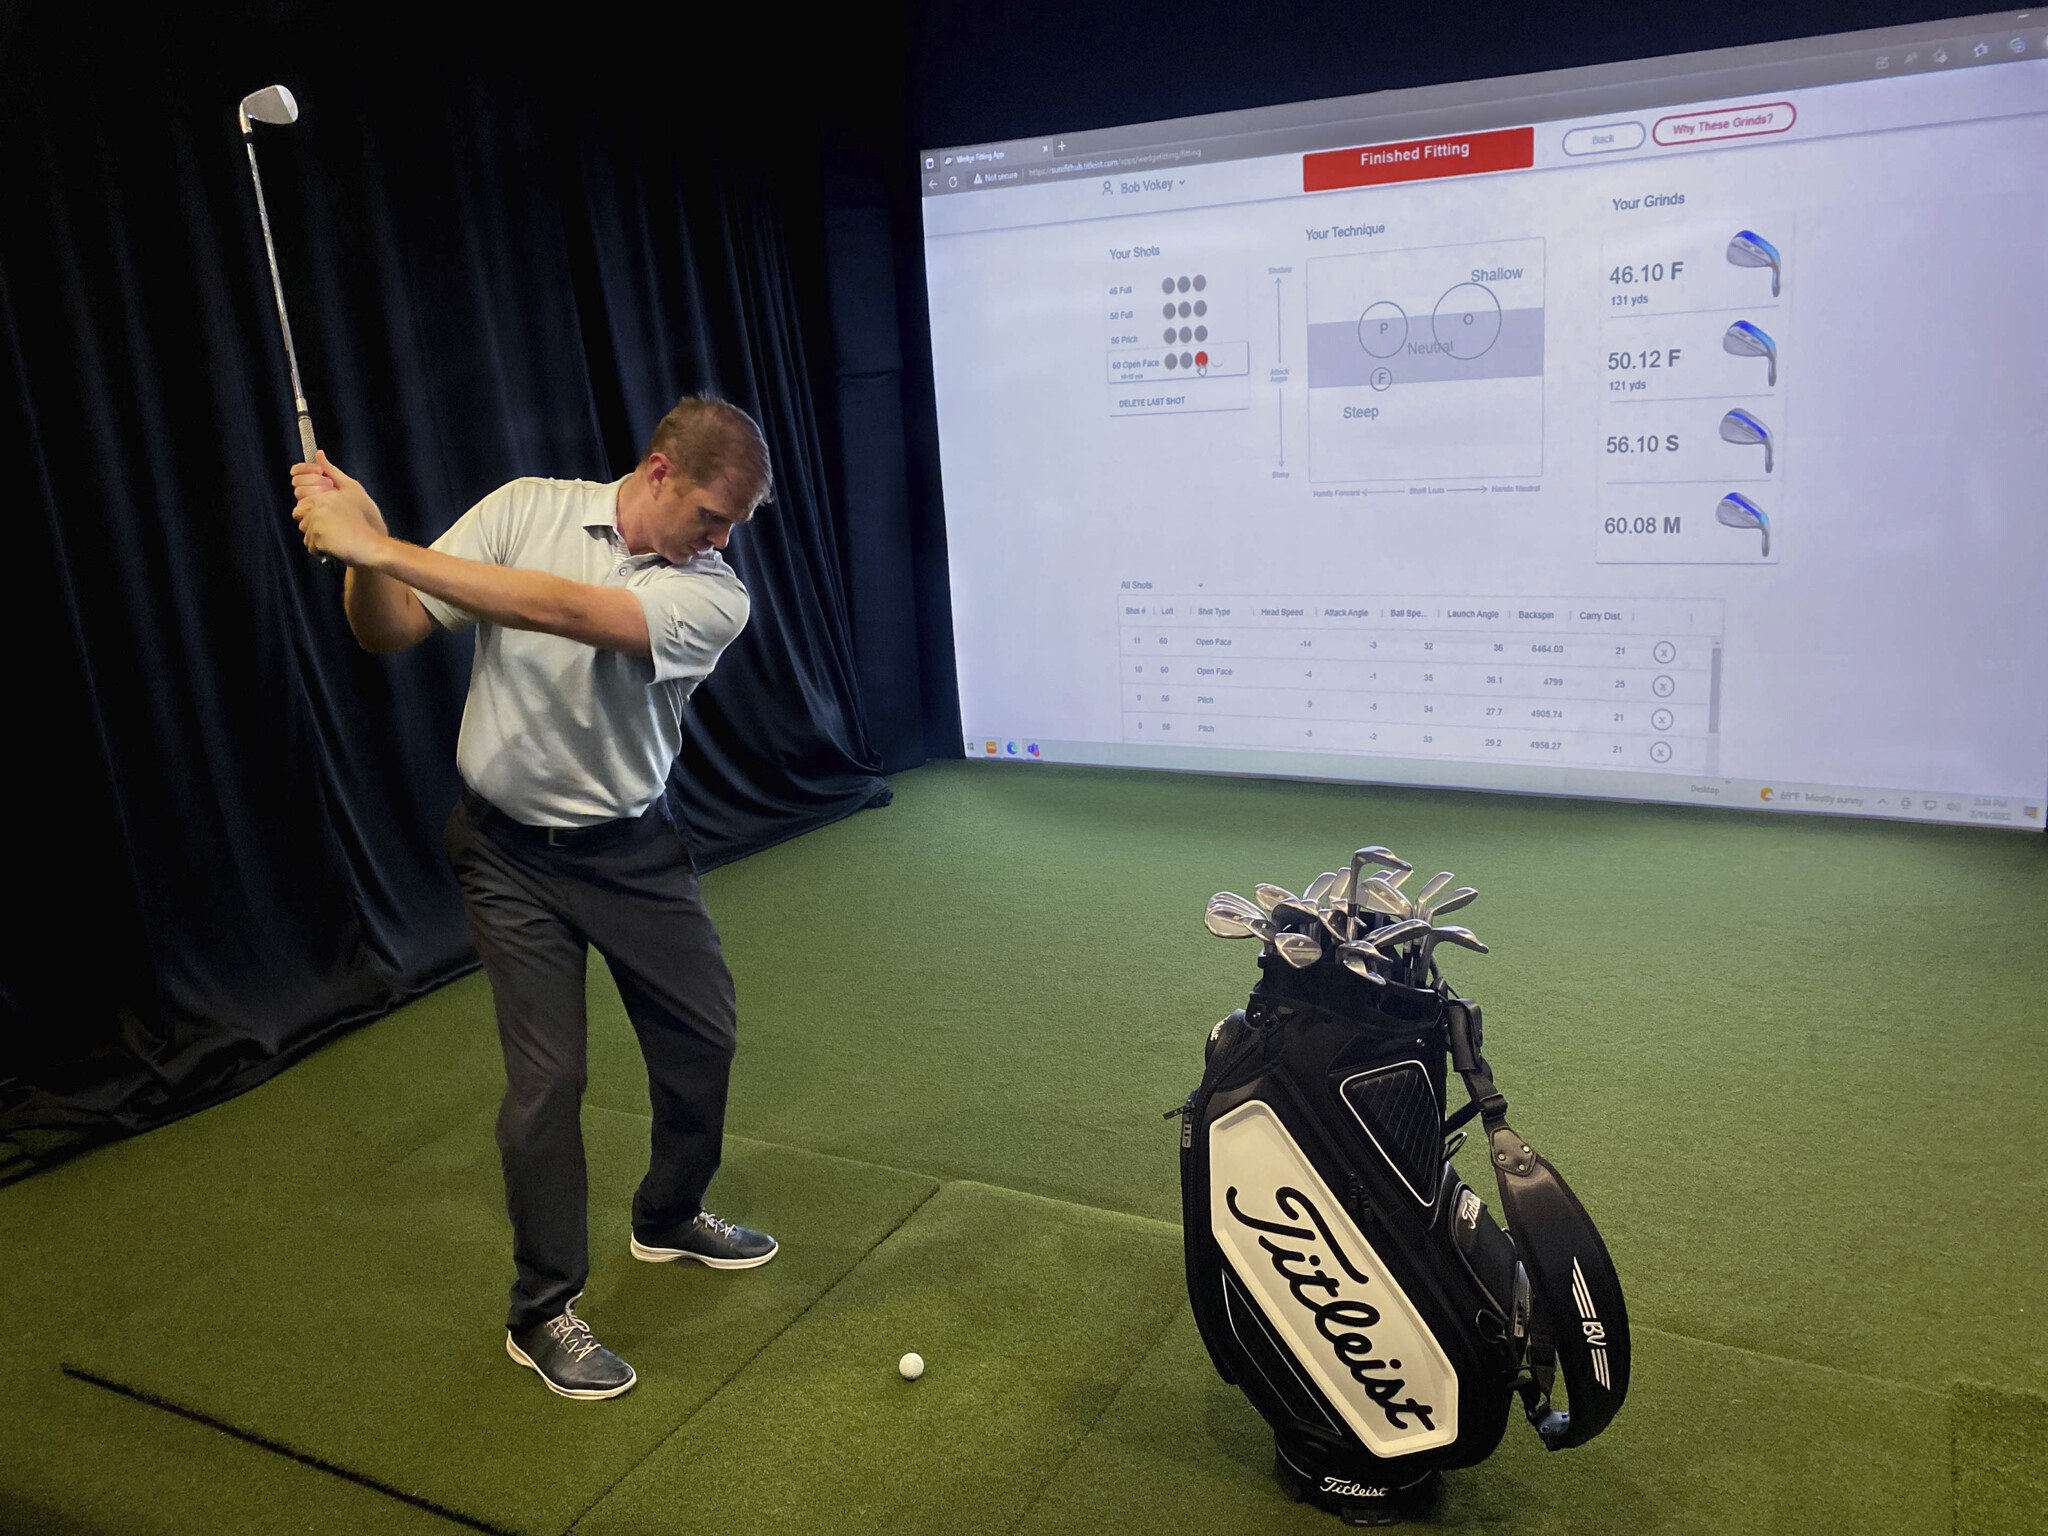 Titleist Vokey fitting app makes getting the right wedges smarter and faster Golf Equipment Clubs, Balls, Bags GolfDigest